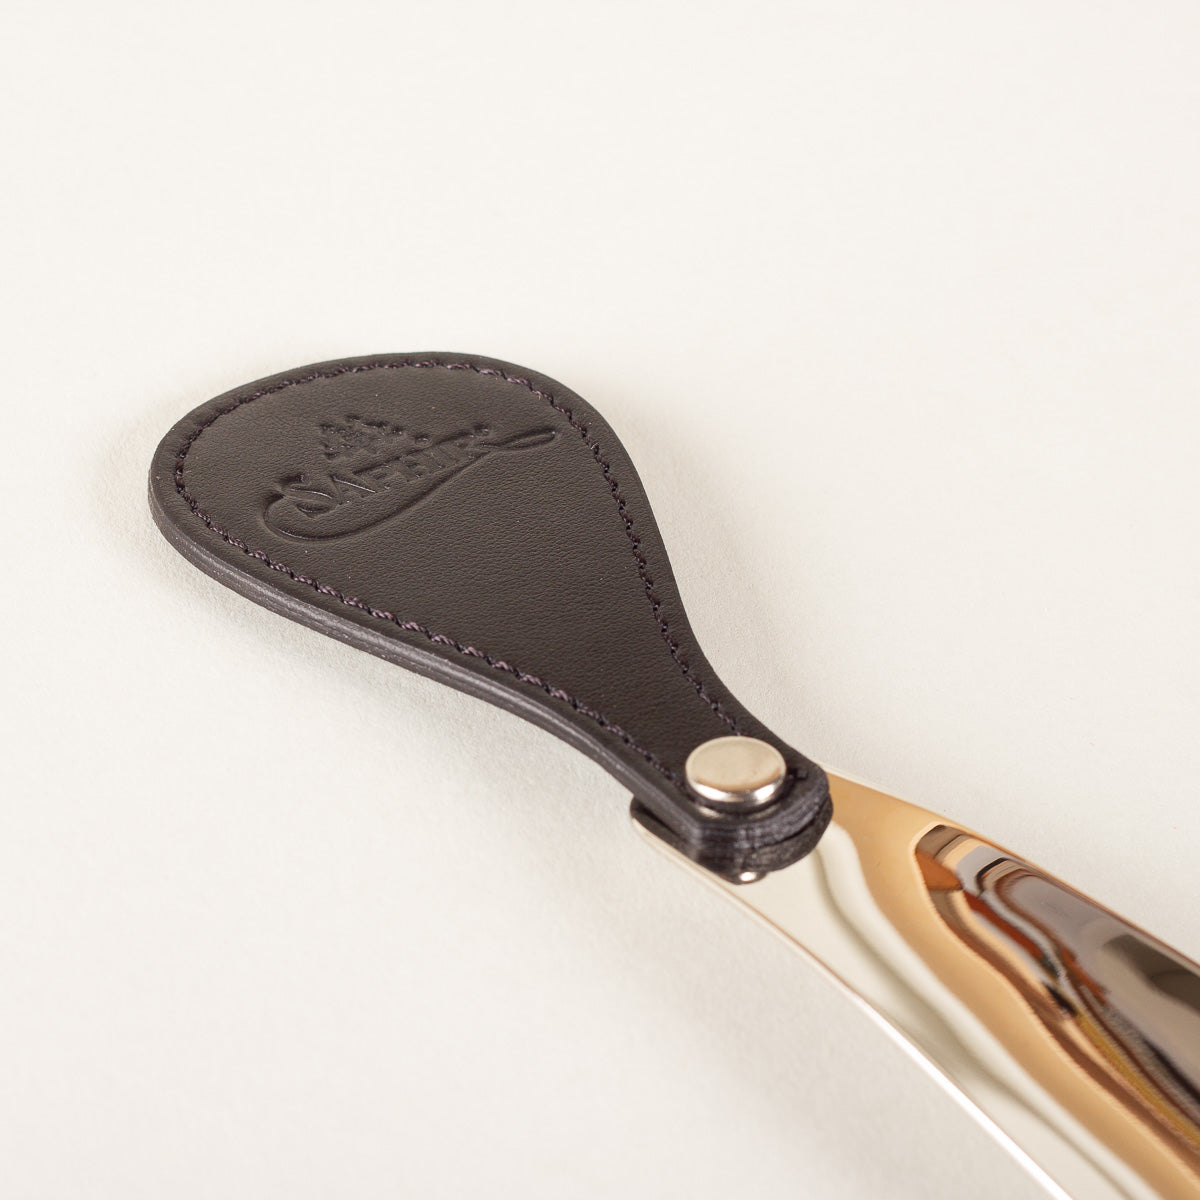 La Cordonnerie Anglaise Black leather and metal shoe horn